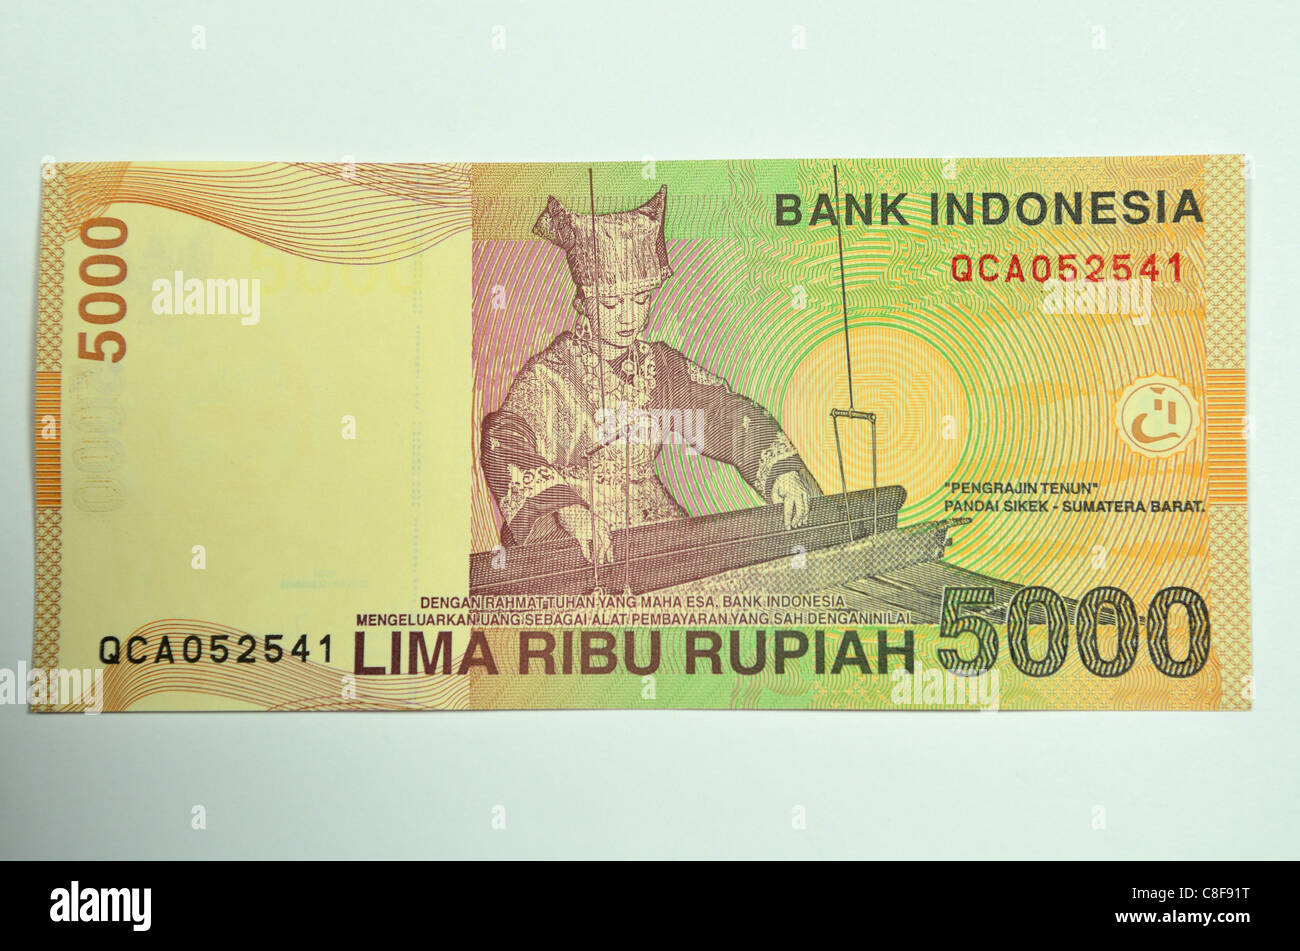 Bank note of Indonesia, Rupiah. Stock Photo